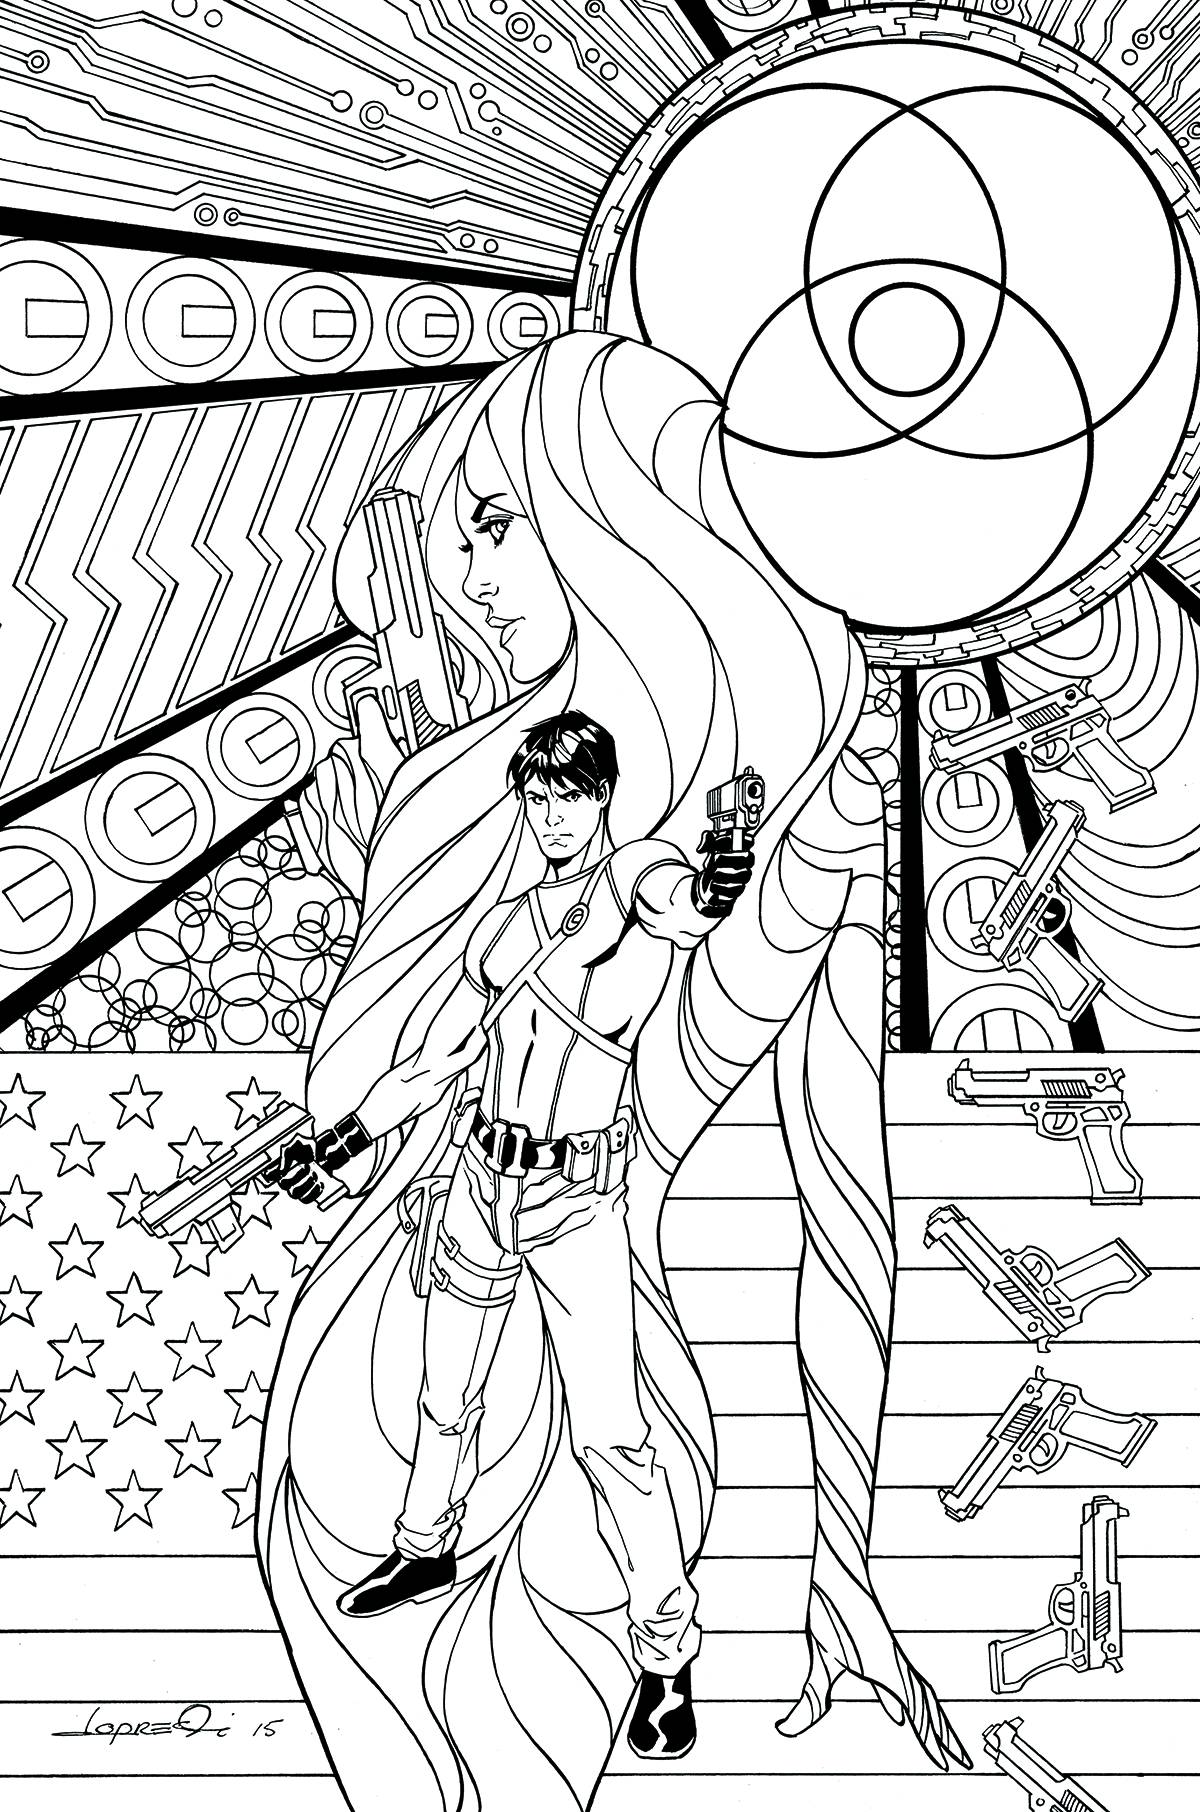 Grayson #16 Adult Coloring Book Variant Edition (2014)